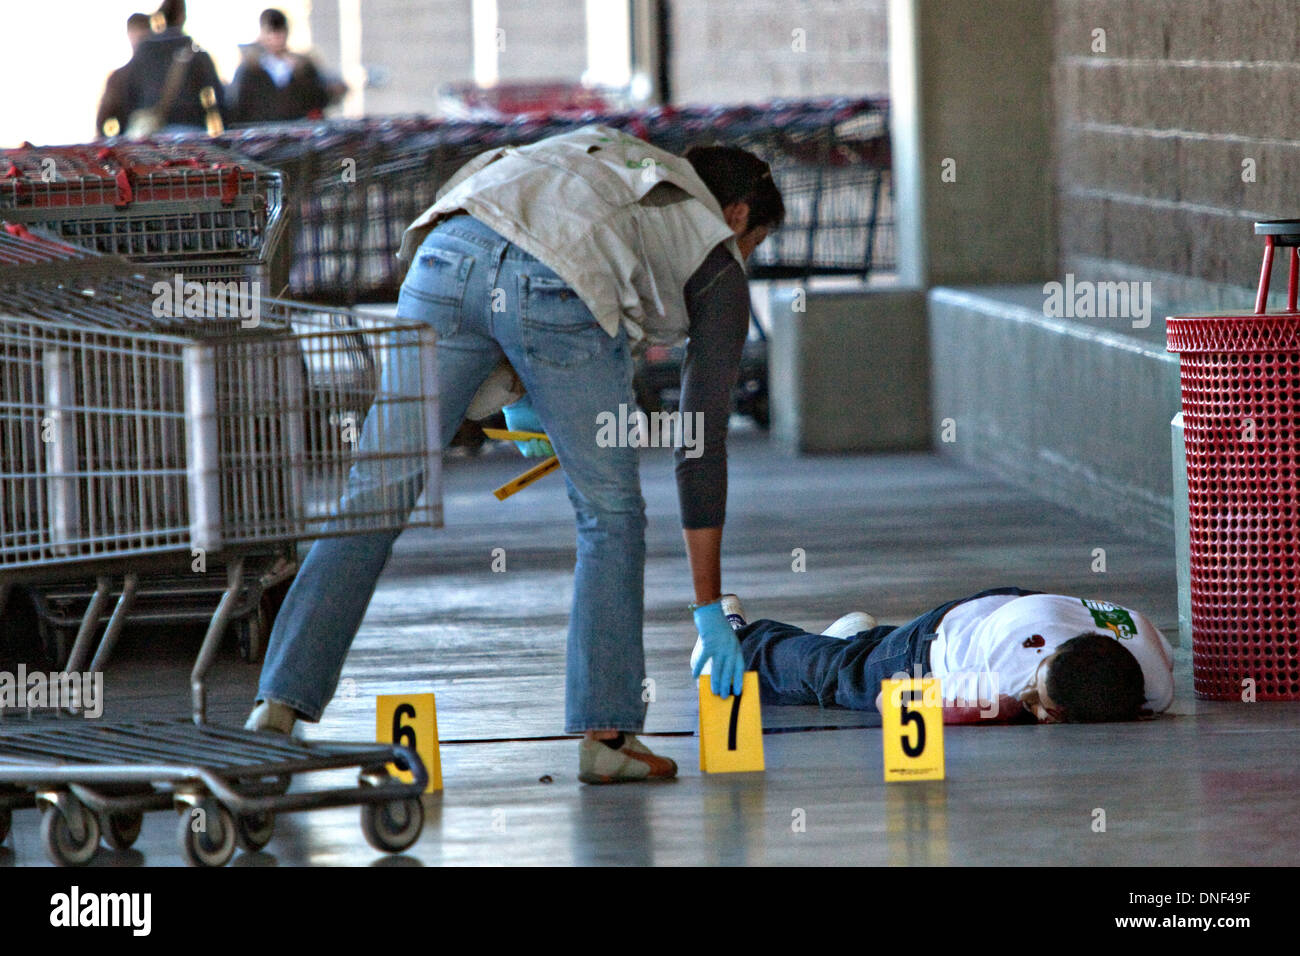 Investigators number the bullet casings found at the scene of a drug related execution at the Costco Store January 15, 2009 in Juarez, Mexico. The shooting, believed linked to the ongoing drug war which has already claimed more than 40 people since the start of the year. More than 1600 people were killed in Juarez in 2008, making Juarez the most violent city in Mexico. Stock Photo